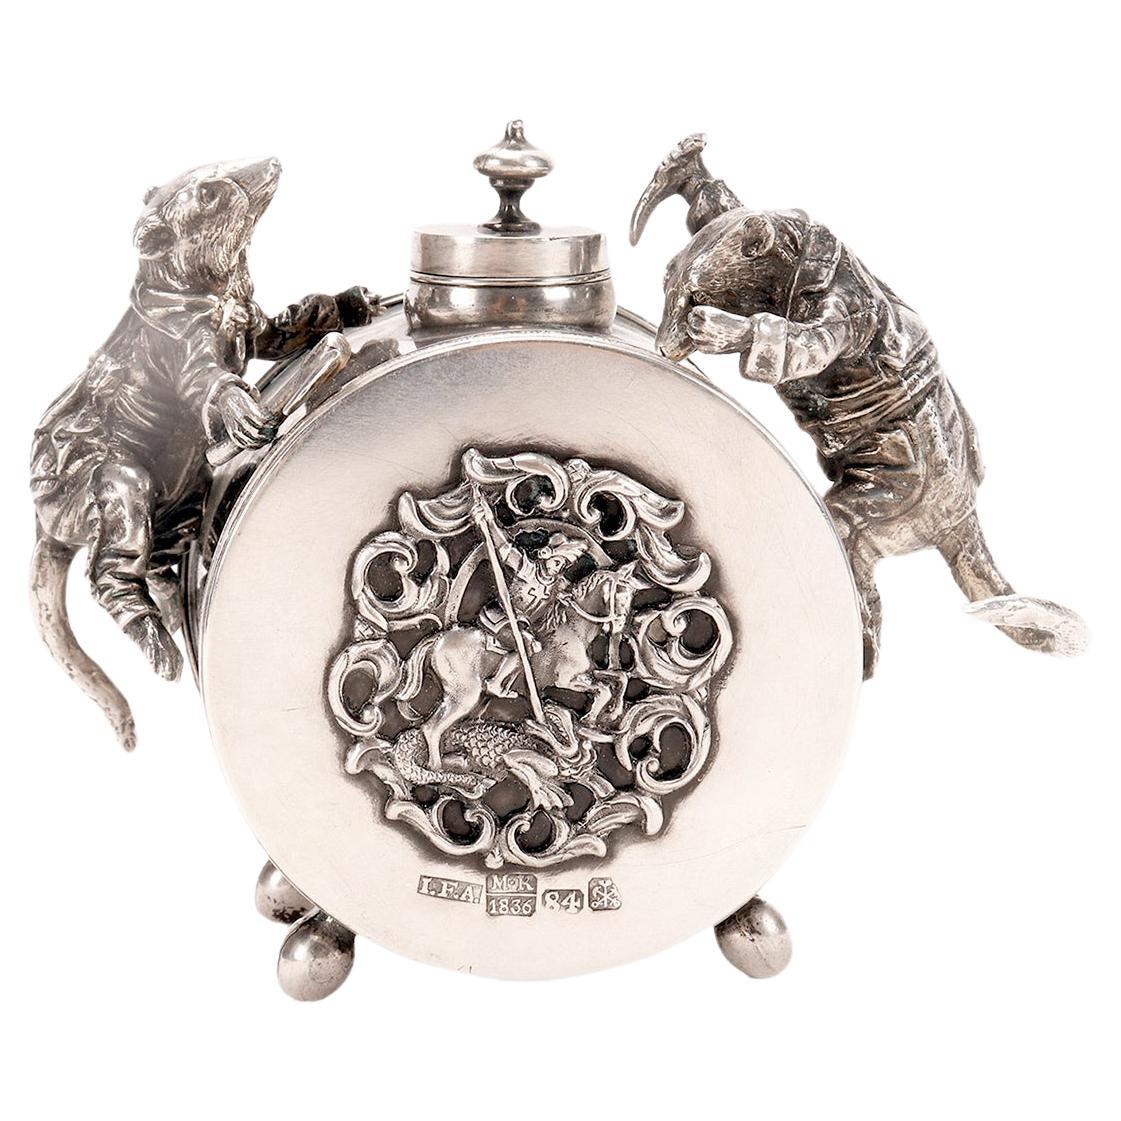 A Russian silver figured inkwell, jeweler: Johann Fredrik Akerblom, taster Mikhail Mikhailovich Karpinshií. Cylindrical inkwell raised on four feet with chiseled and knurled floral edges. The cylindrical top is hinged with an urn-shaped terminal;